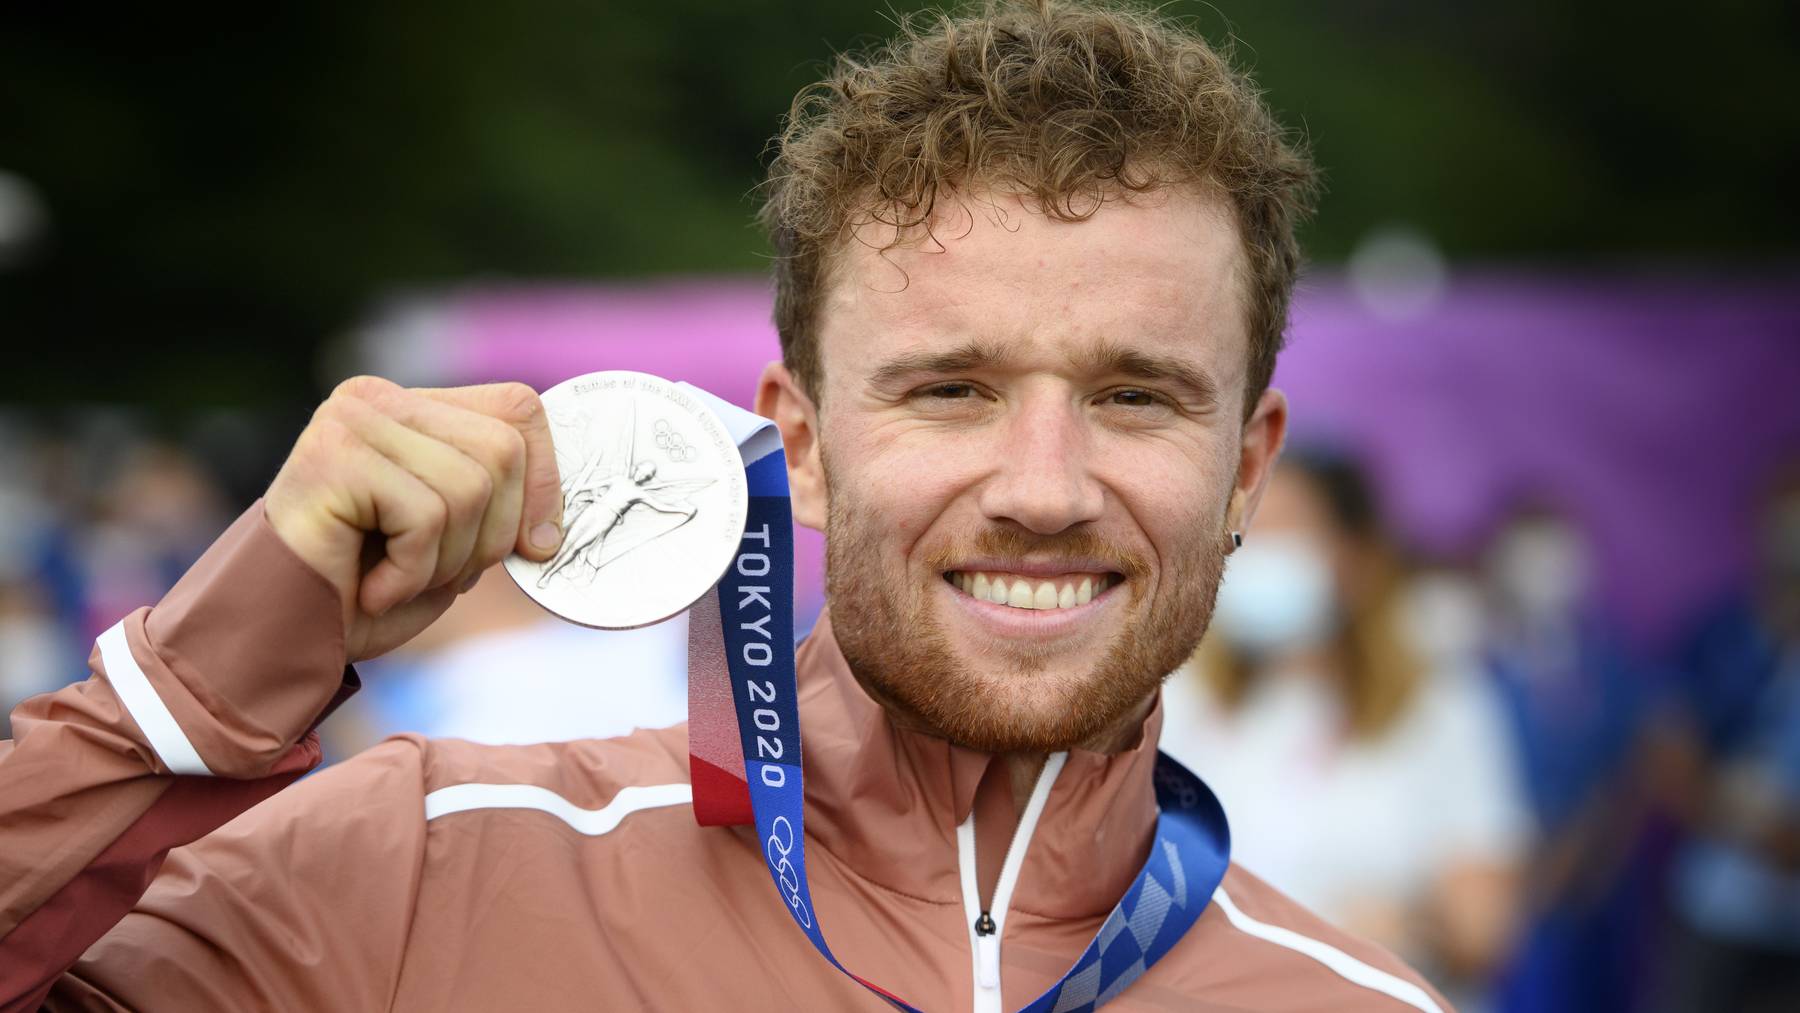 Silver medalist Mathias Flueckiger of Switzerland reacts during the medal ceremony for the Men's Cross-Country event of the Mountain Biking events of the Tokyo 2020 Olympic Games at the Izu Mountain Bike Course in Ono, Shizuoka, Japan, 26 July 2021